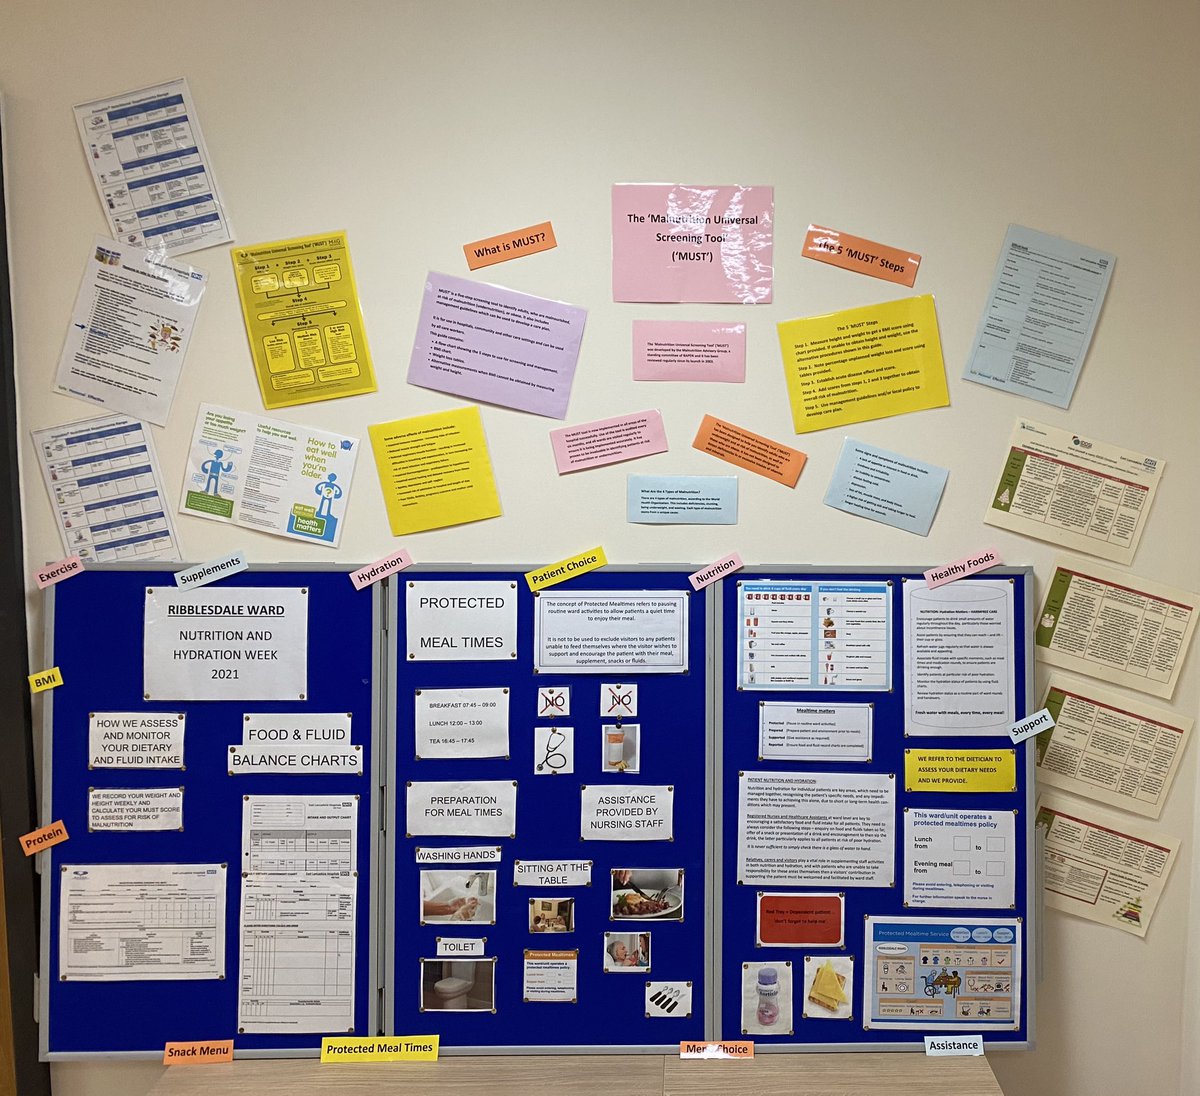 This fantastic full wall display has gone up on one of our @Cicdivision wards to raise awareness of nutrition and the importance of it and how we can positively influence this in hospital. 🍎🍊🥝🥬#NutritionMonth #MUST #ProtectedMealTimes @ELHT_NHS @SarahCaton3 @KirstyThomasson